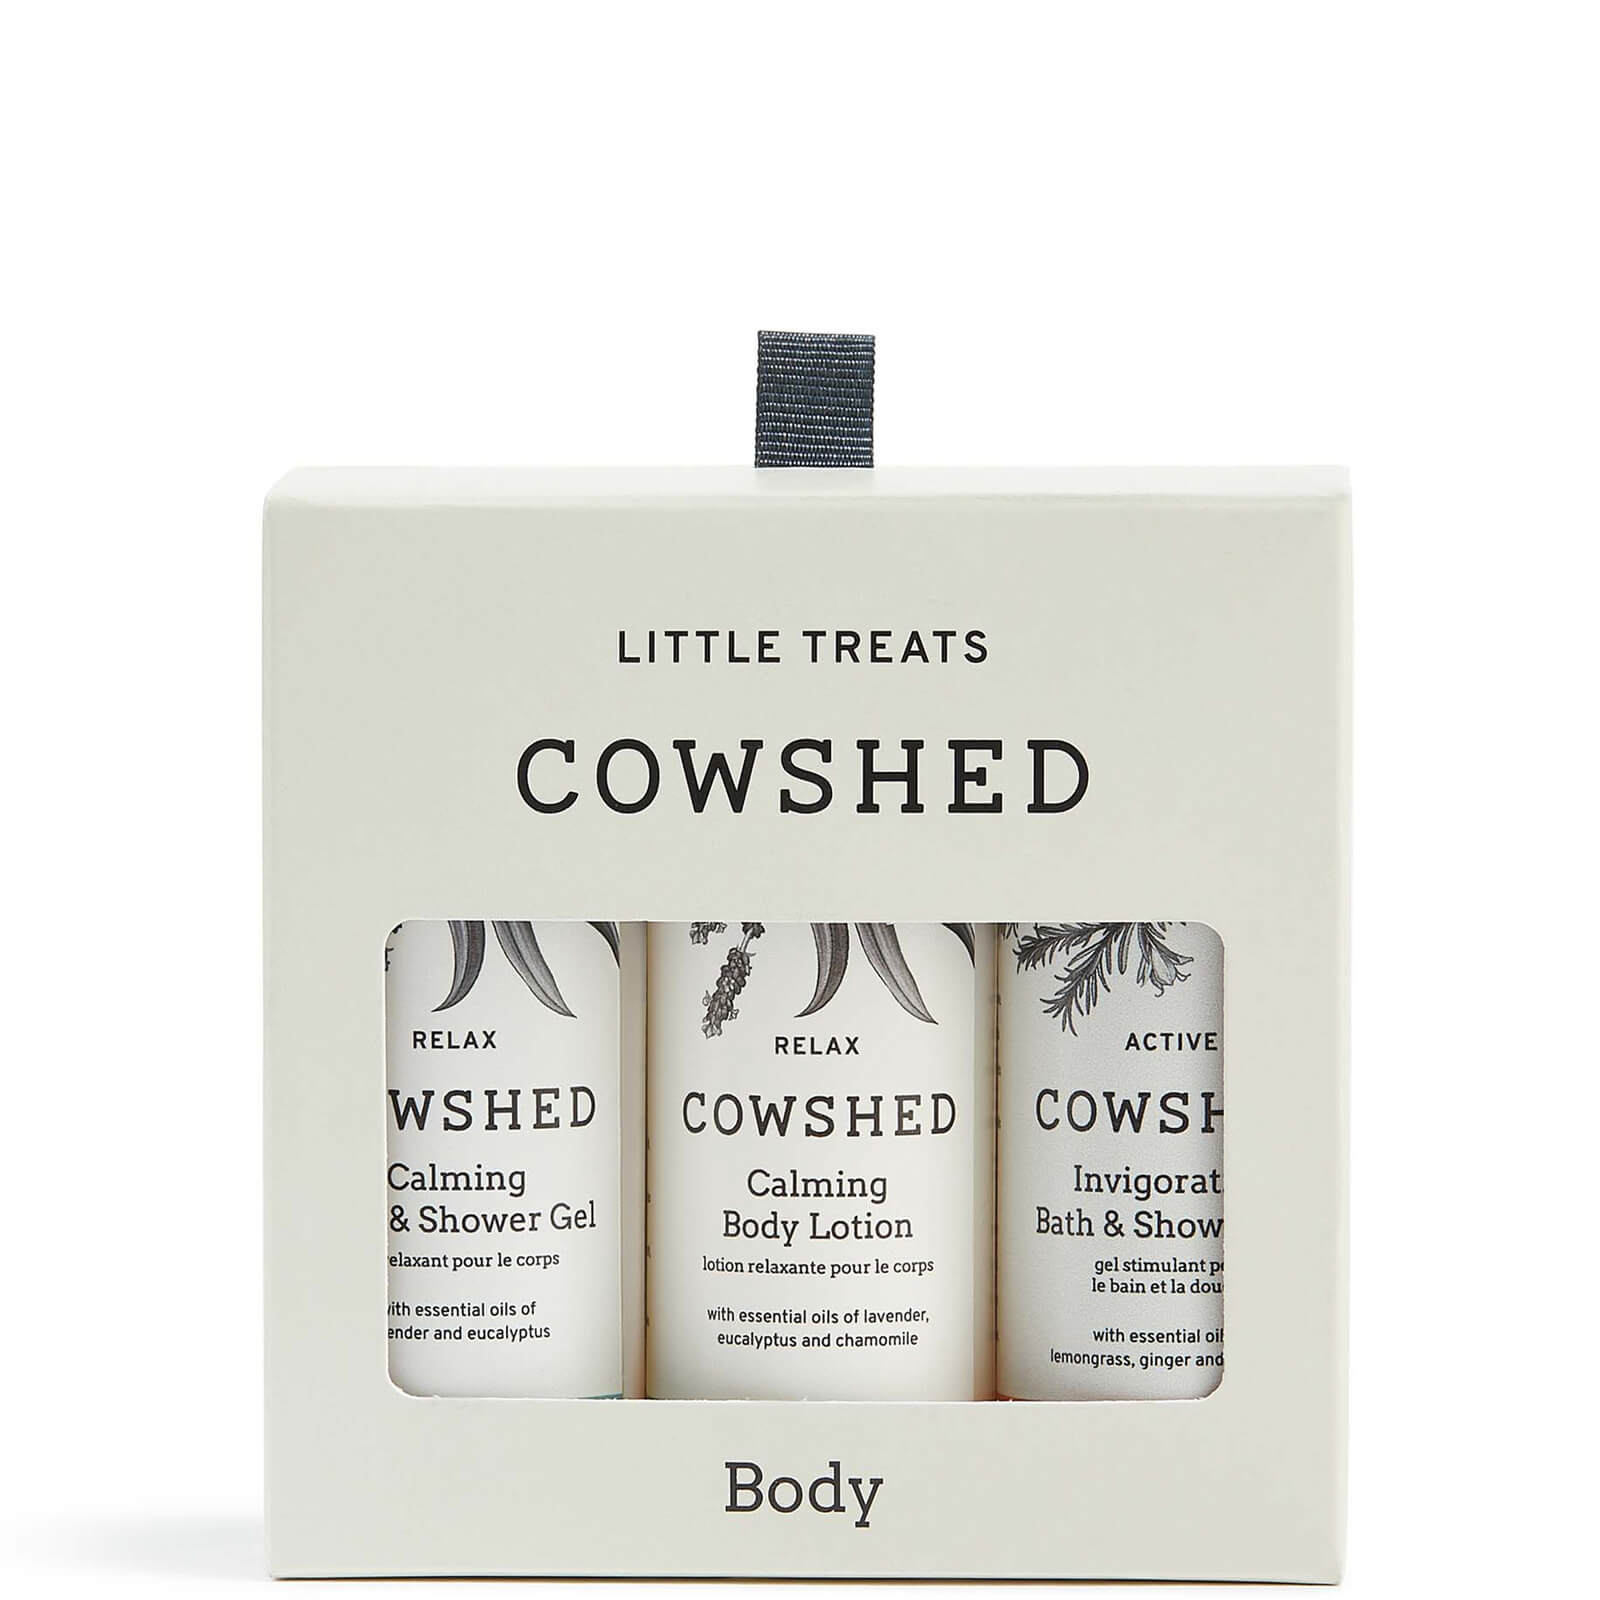 Image of Cowshed Little Treats Body Set